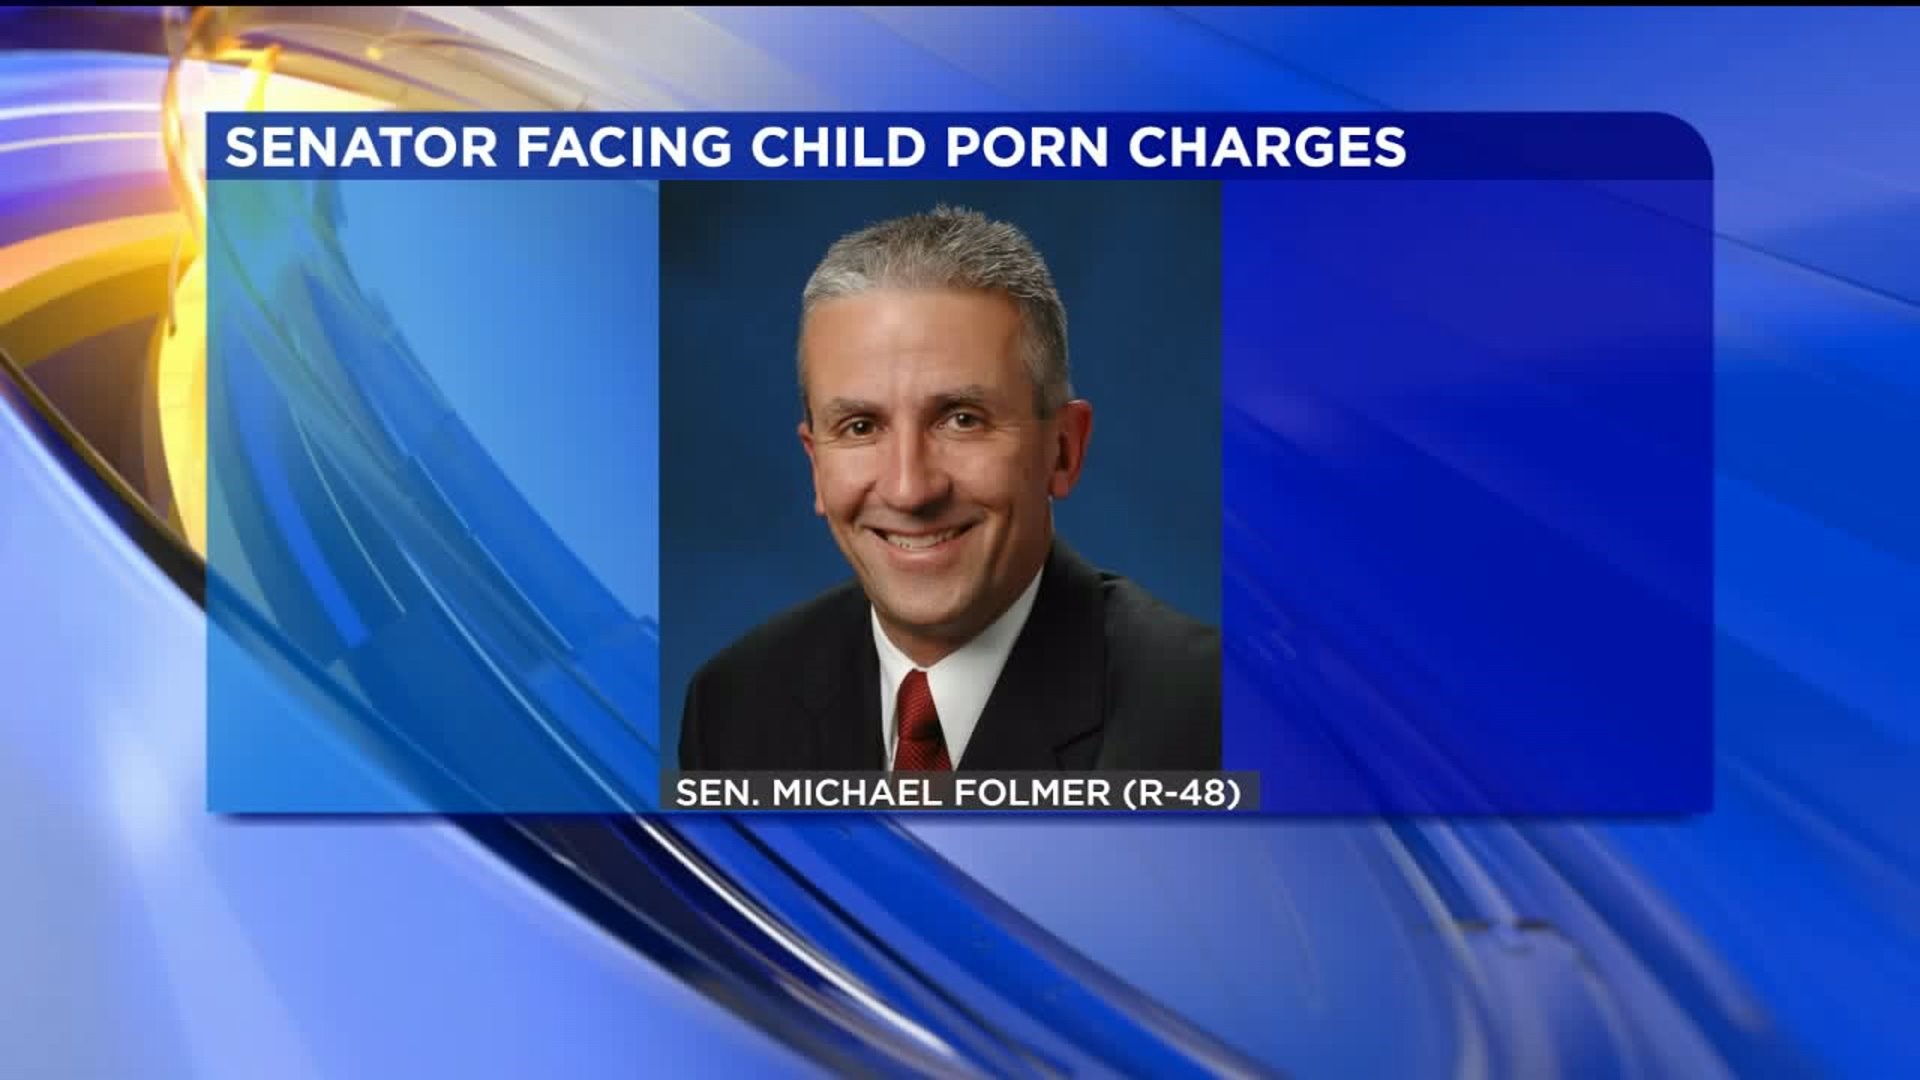 State Senator Arrested on Child Pornography Charges